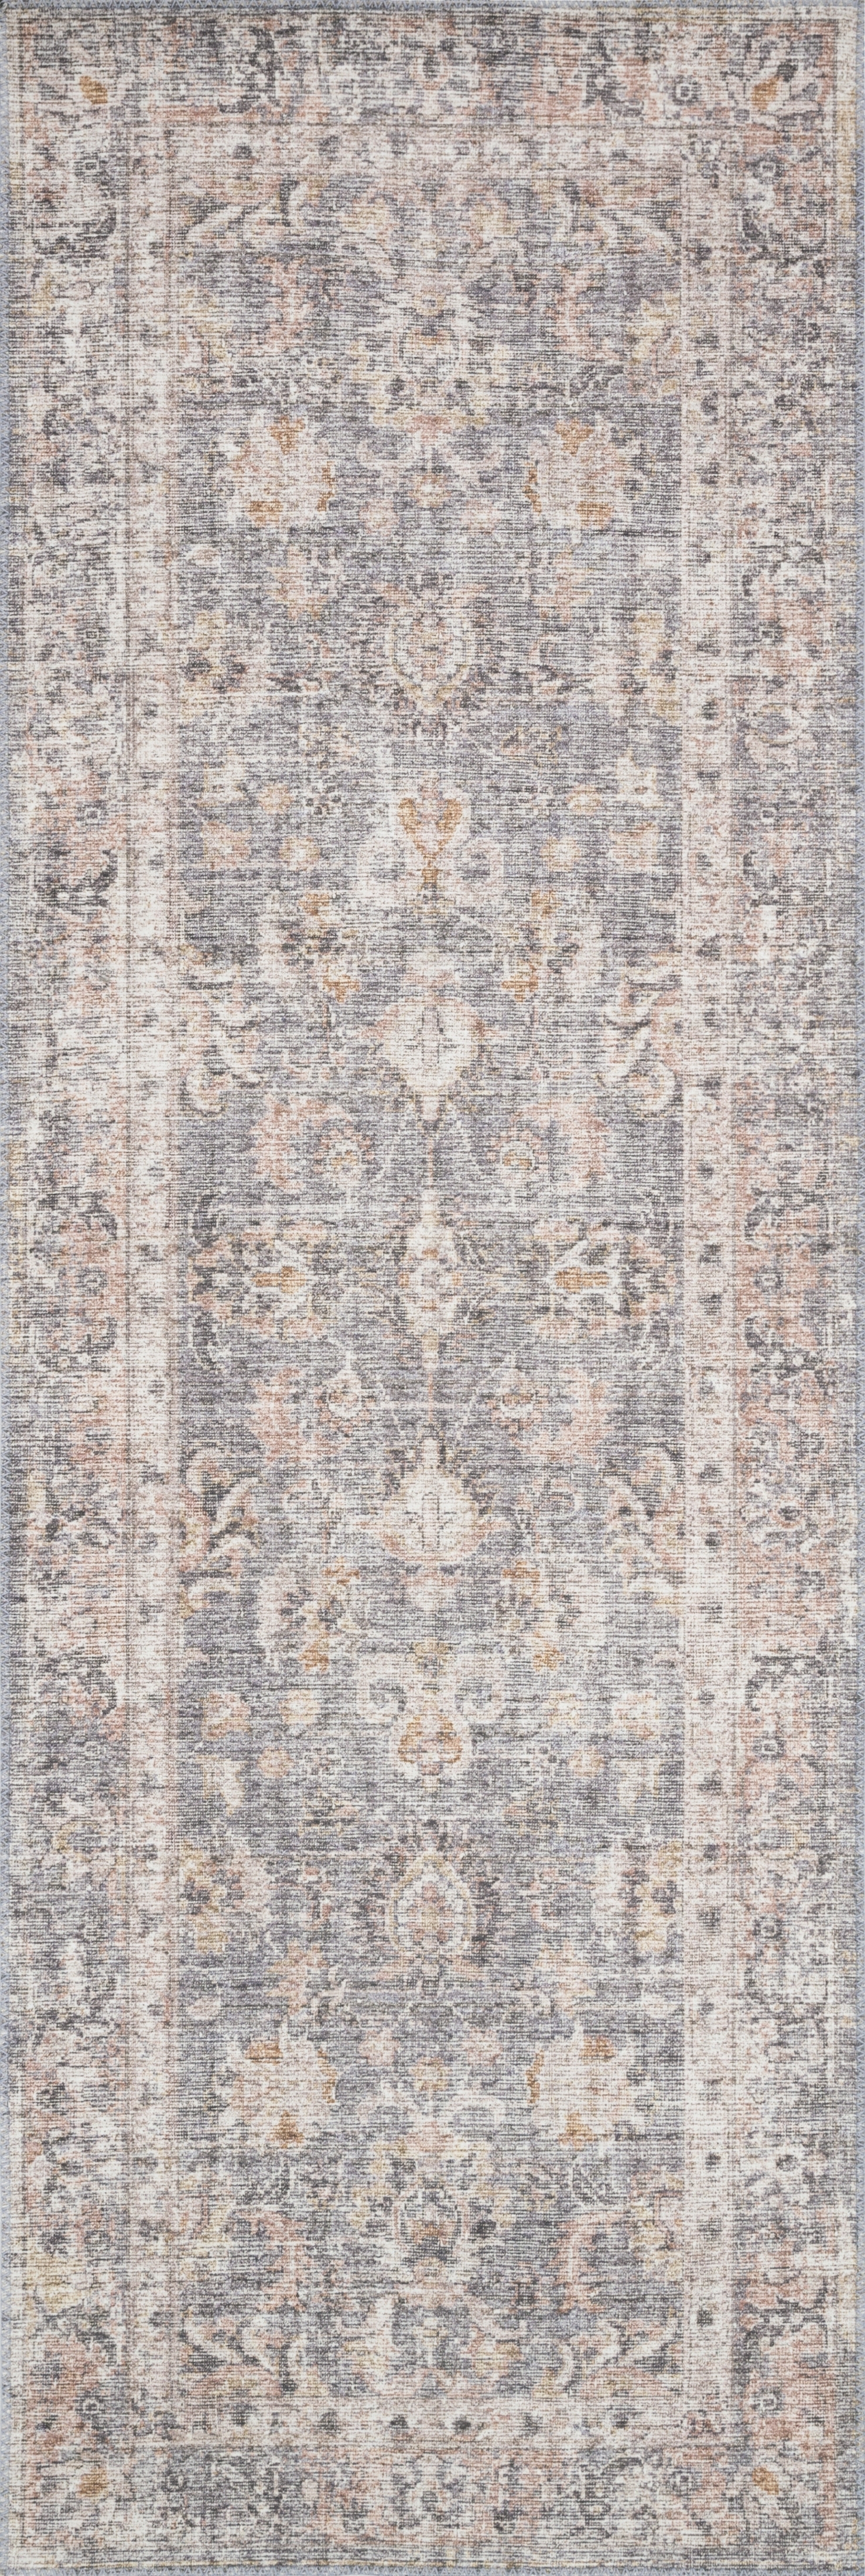 Roze Rug, Grey and Apricot 3'6" x 5'6" - Image 5